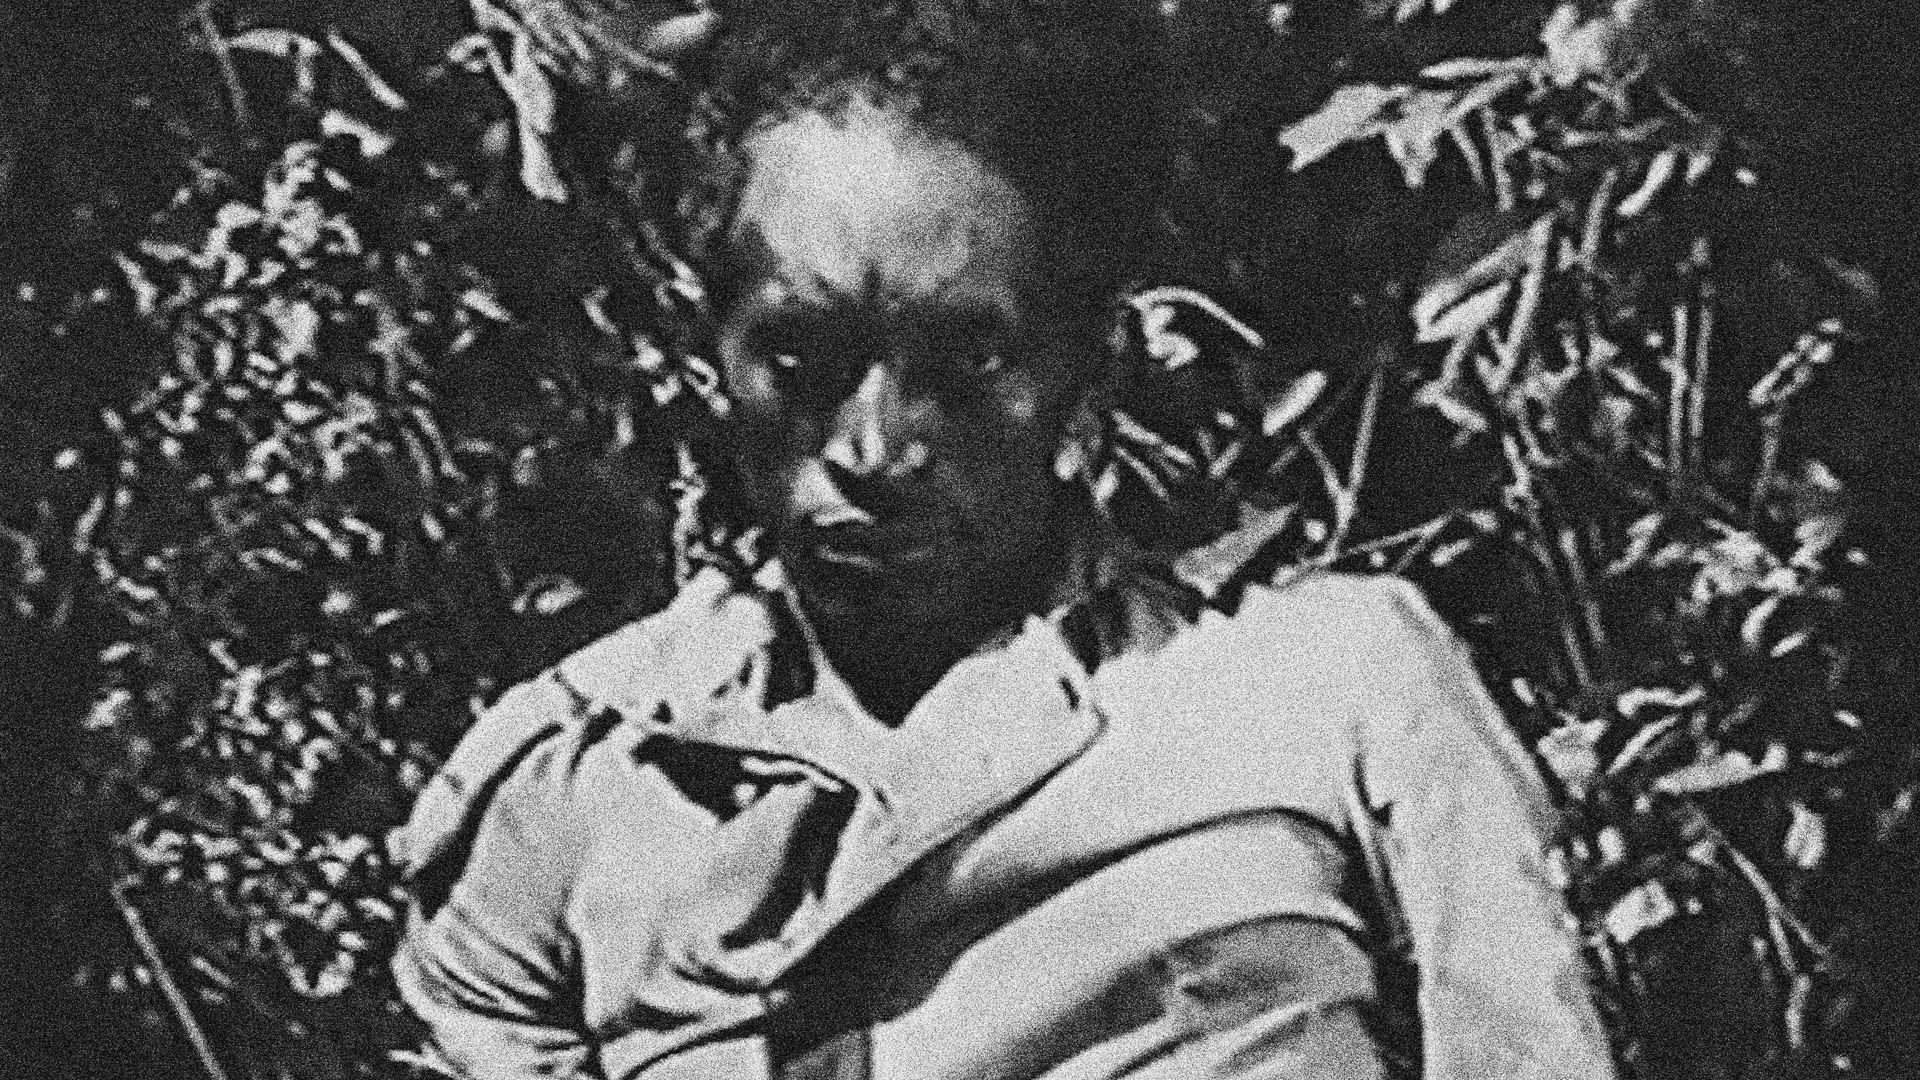 Black and white still from 'The White Death of the Black Wizard,' depicting a Black man staring in the camera.